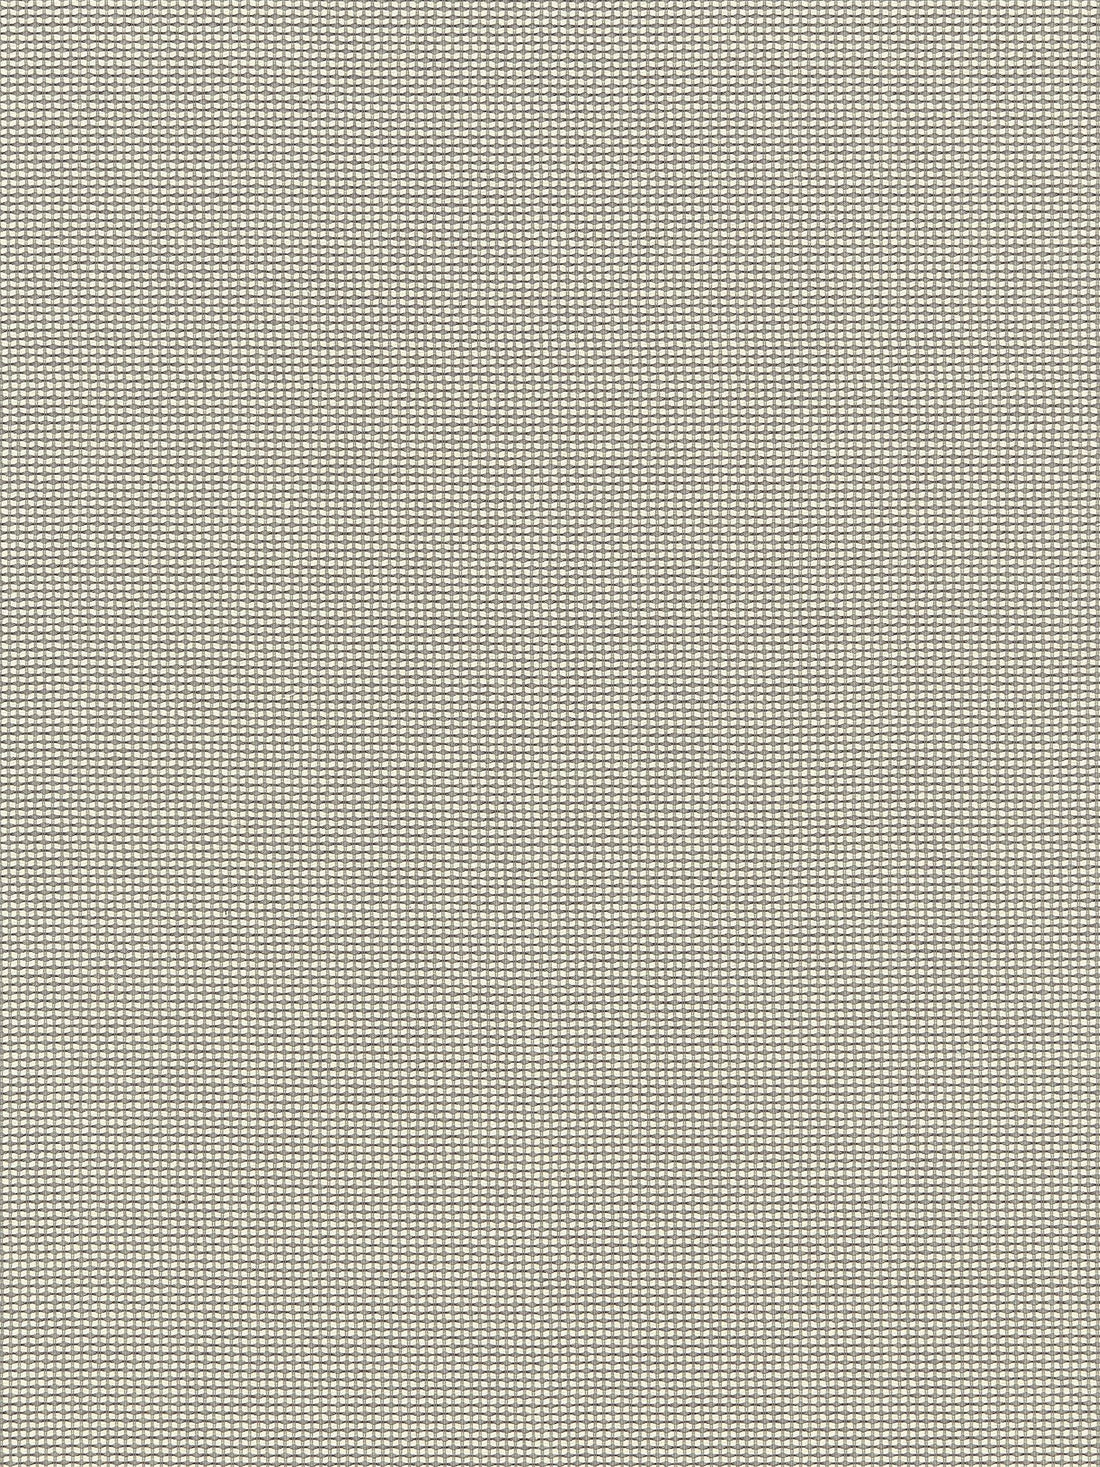 Cortland Weave fabric in taupe color - pattern number BK 0003K65119 - by Scalamandre in the Old World Weavers collection